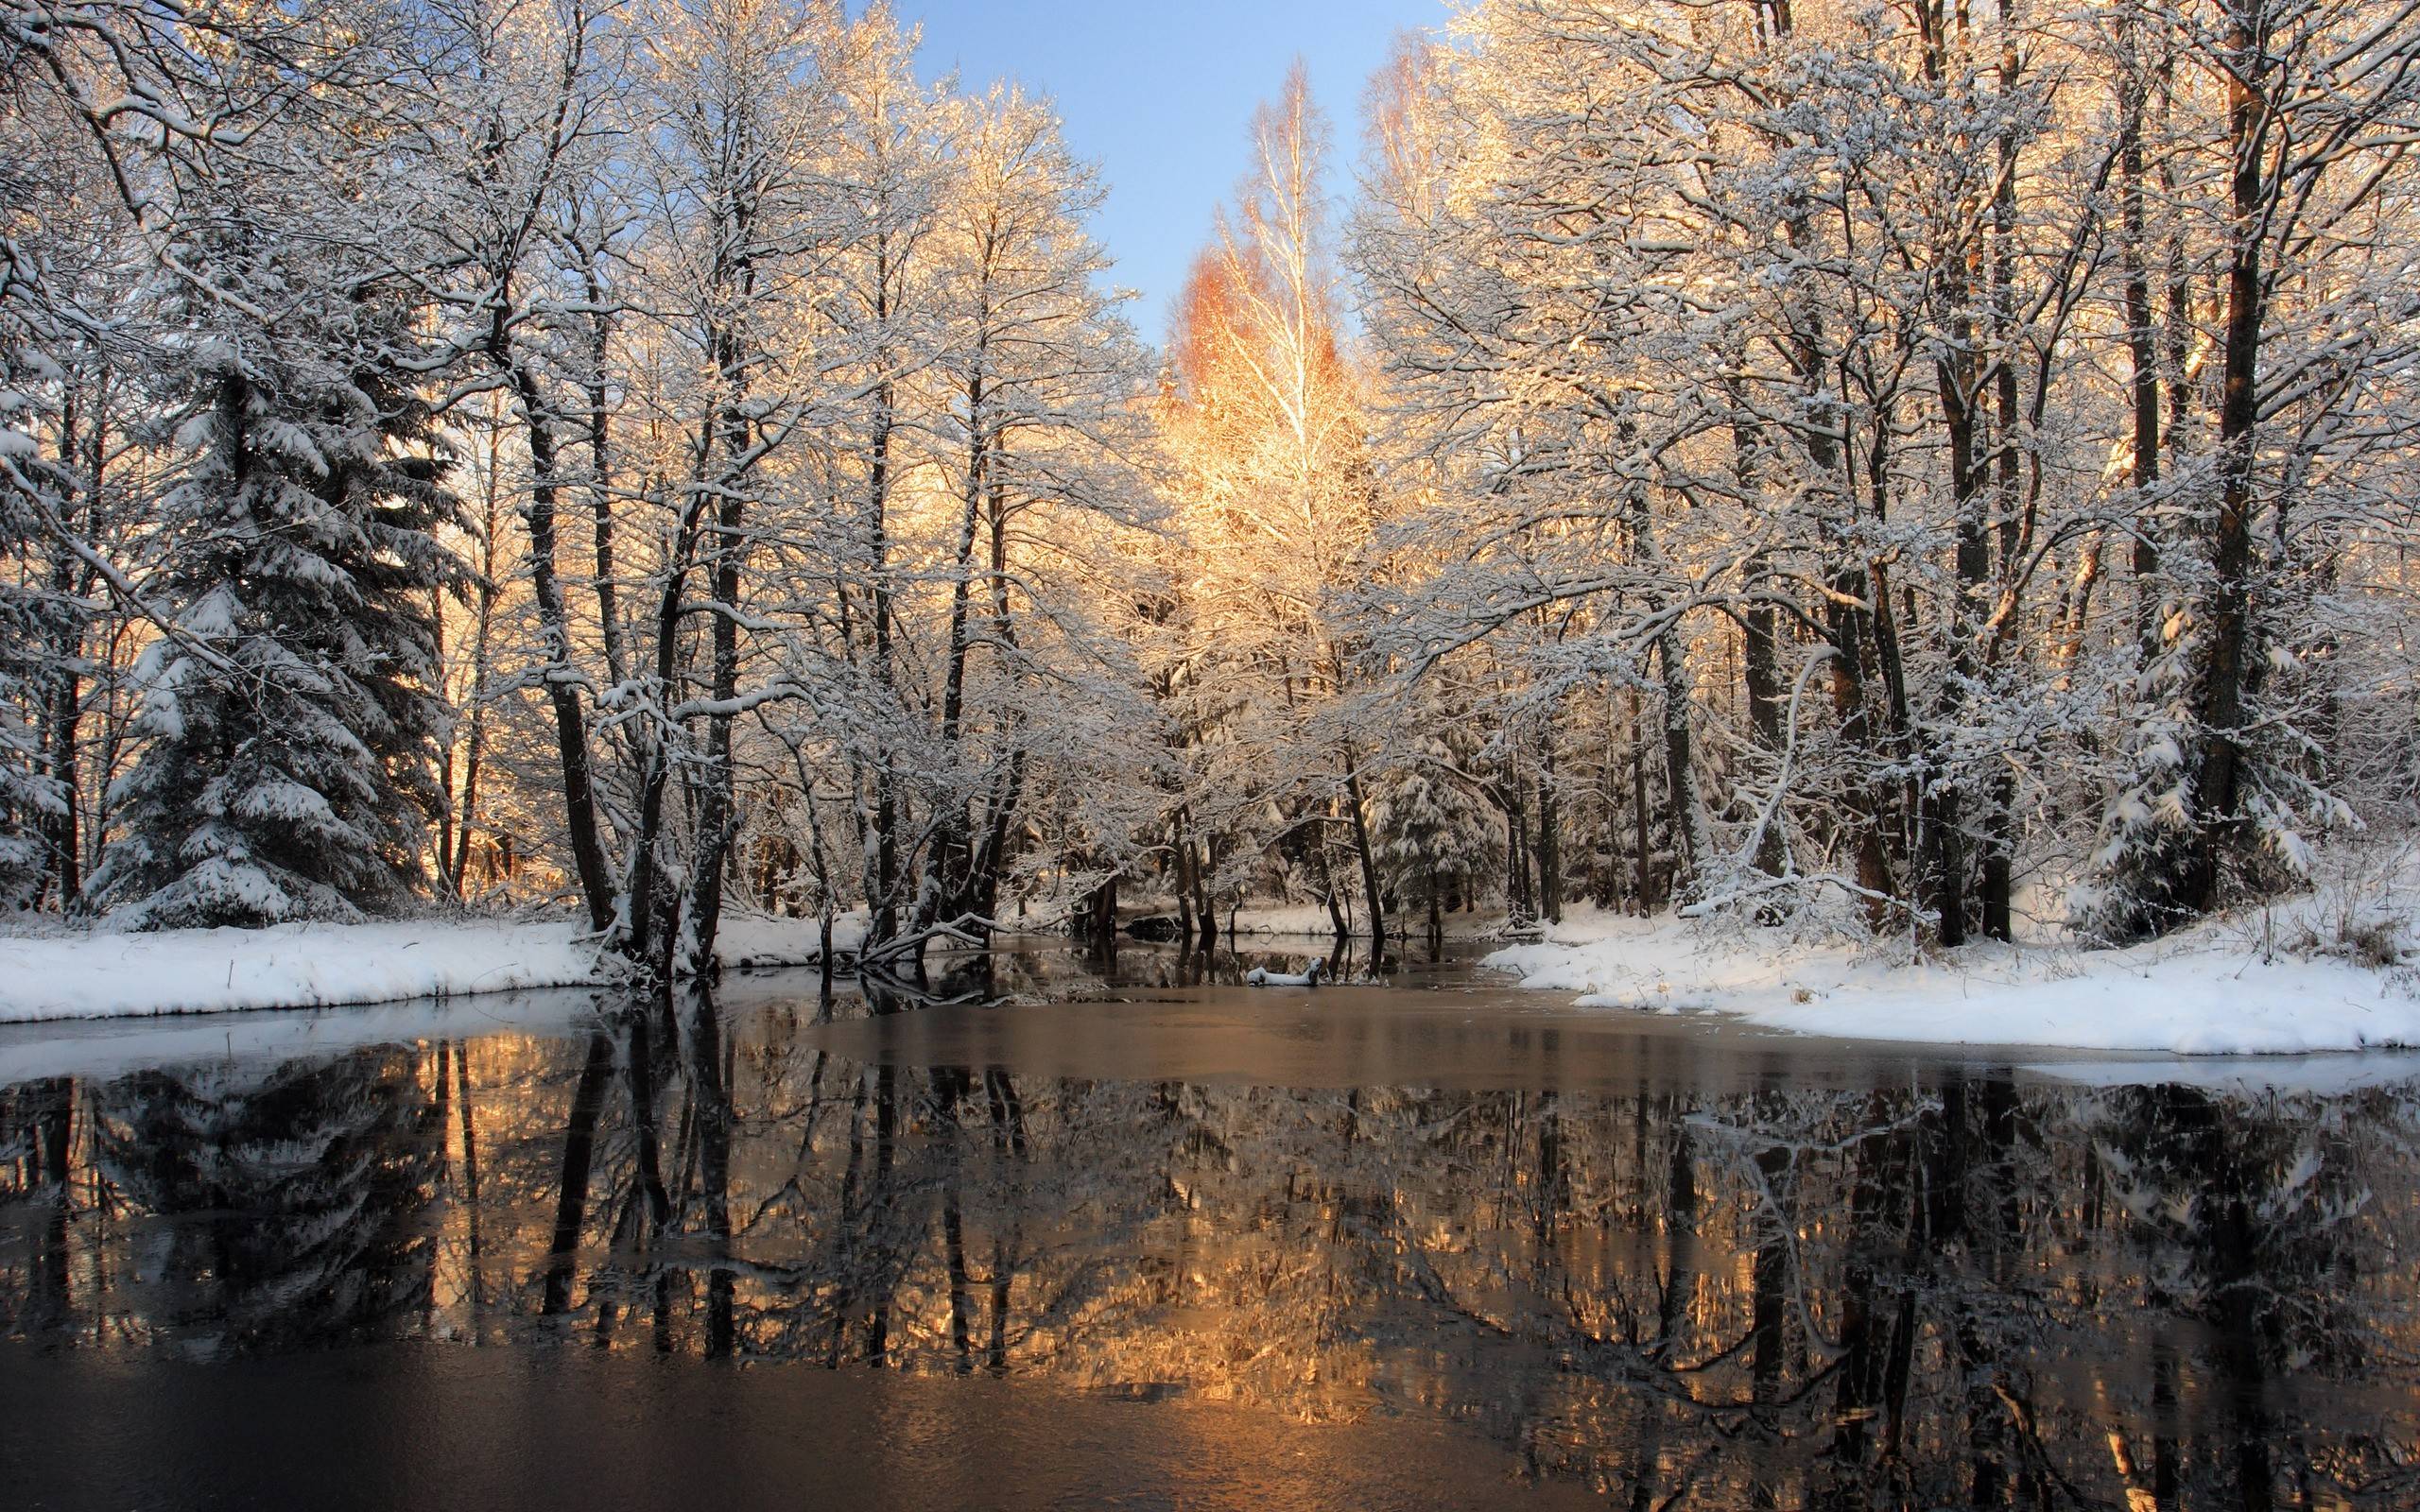 Winter Nature Scenes Wallpapers 5172 Hd Wallpapers in Nature